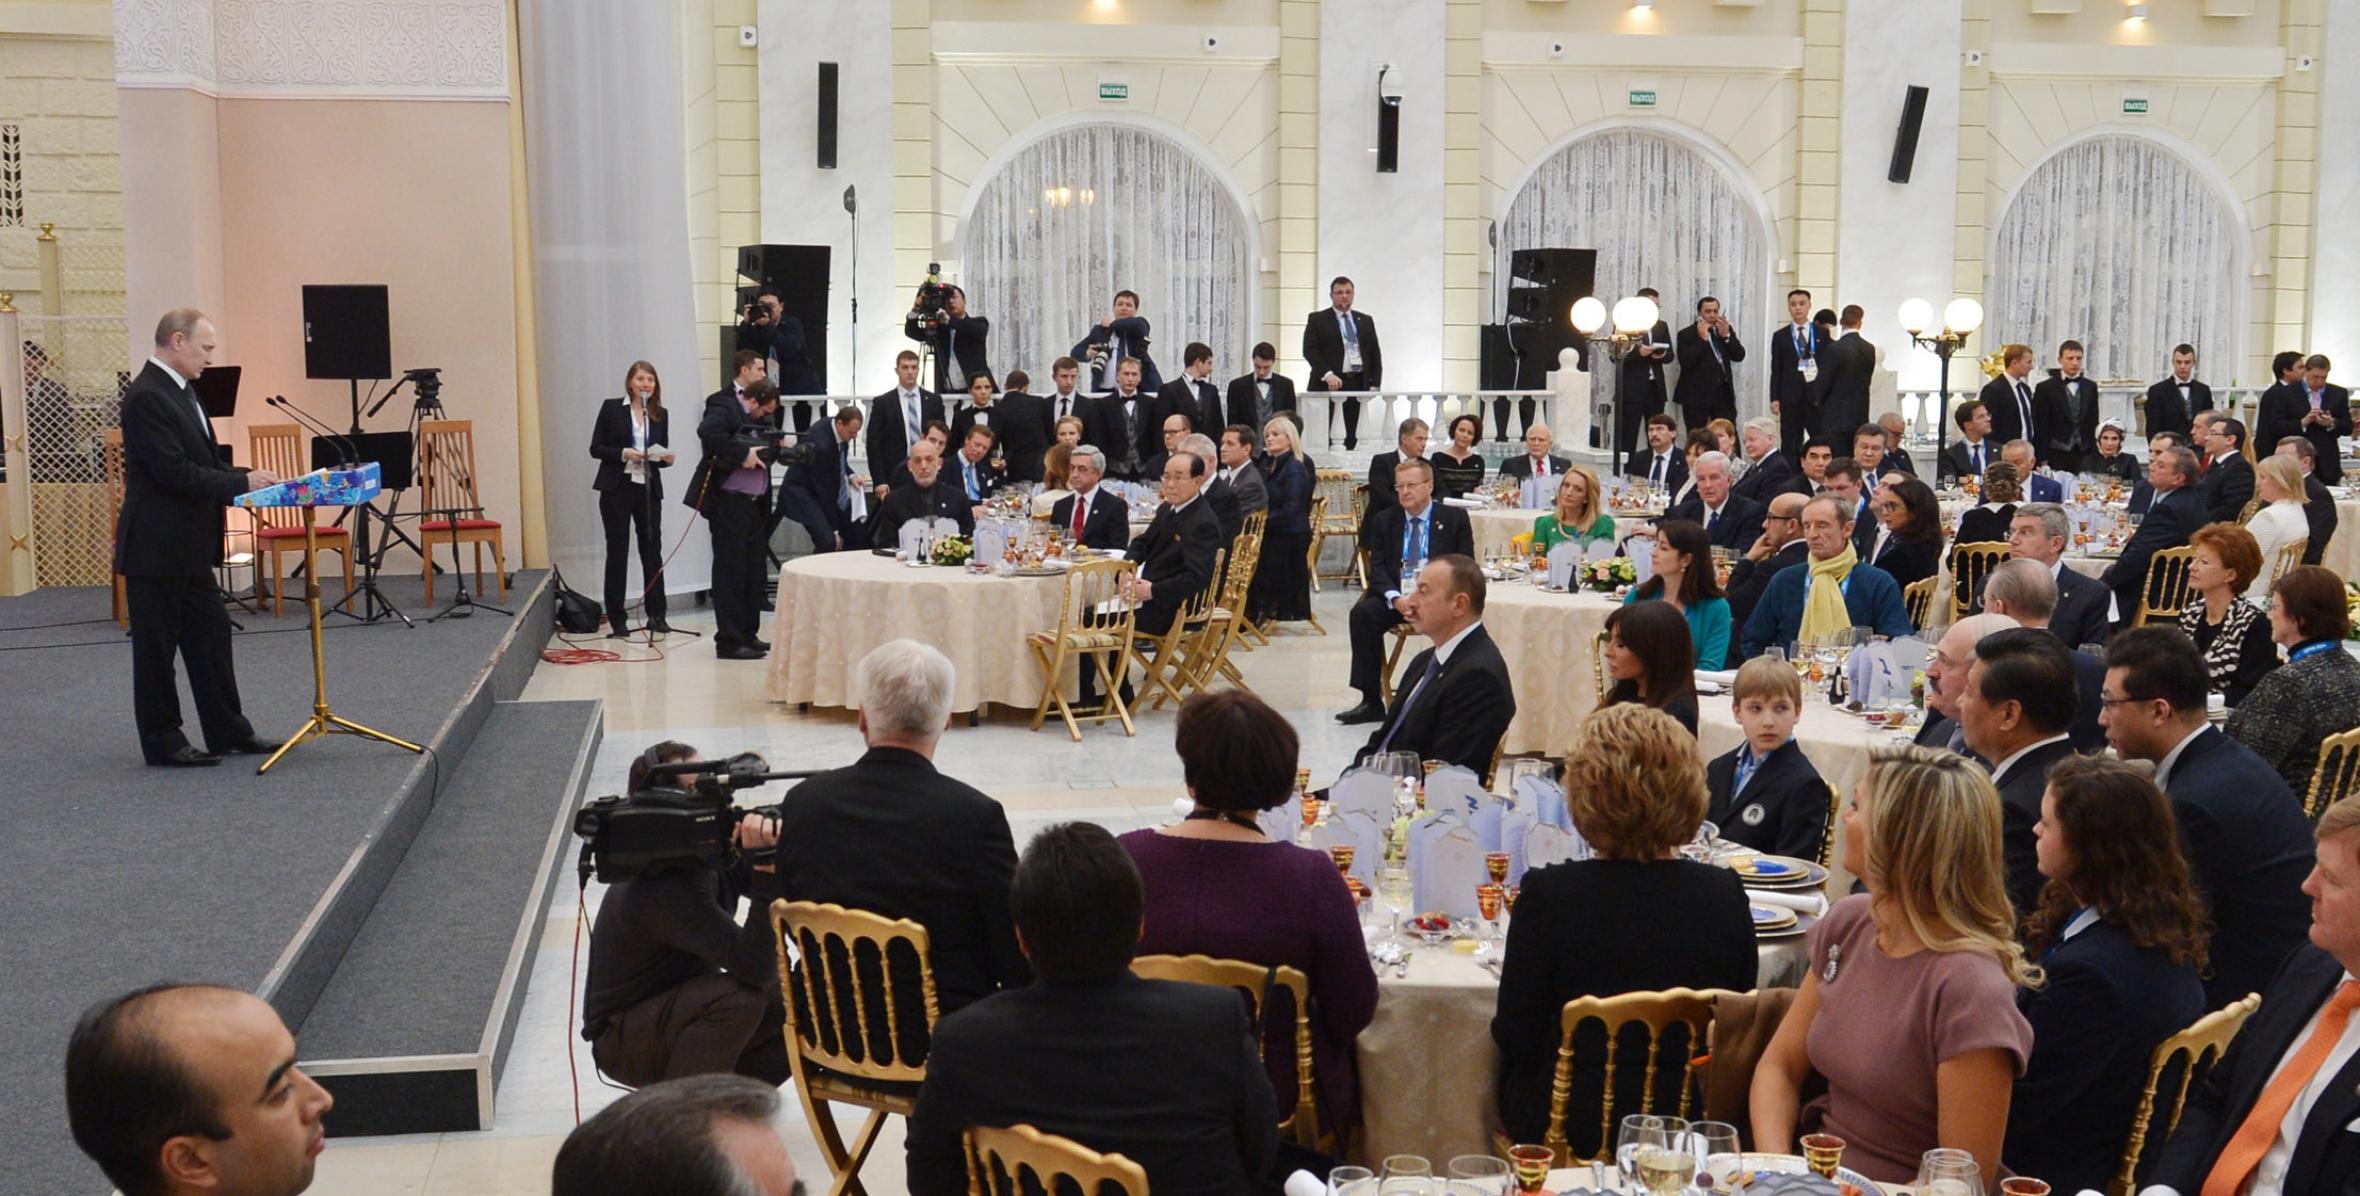 Ilham Aliyev attended an official reception in Sochi